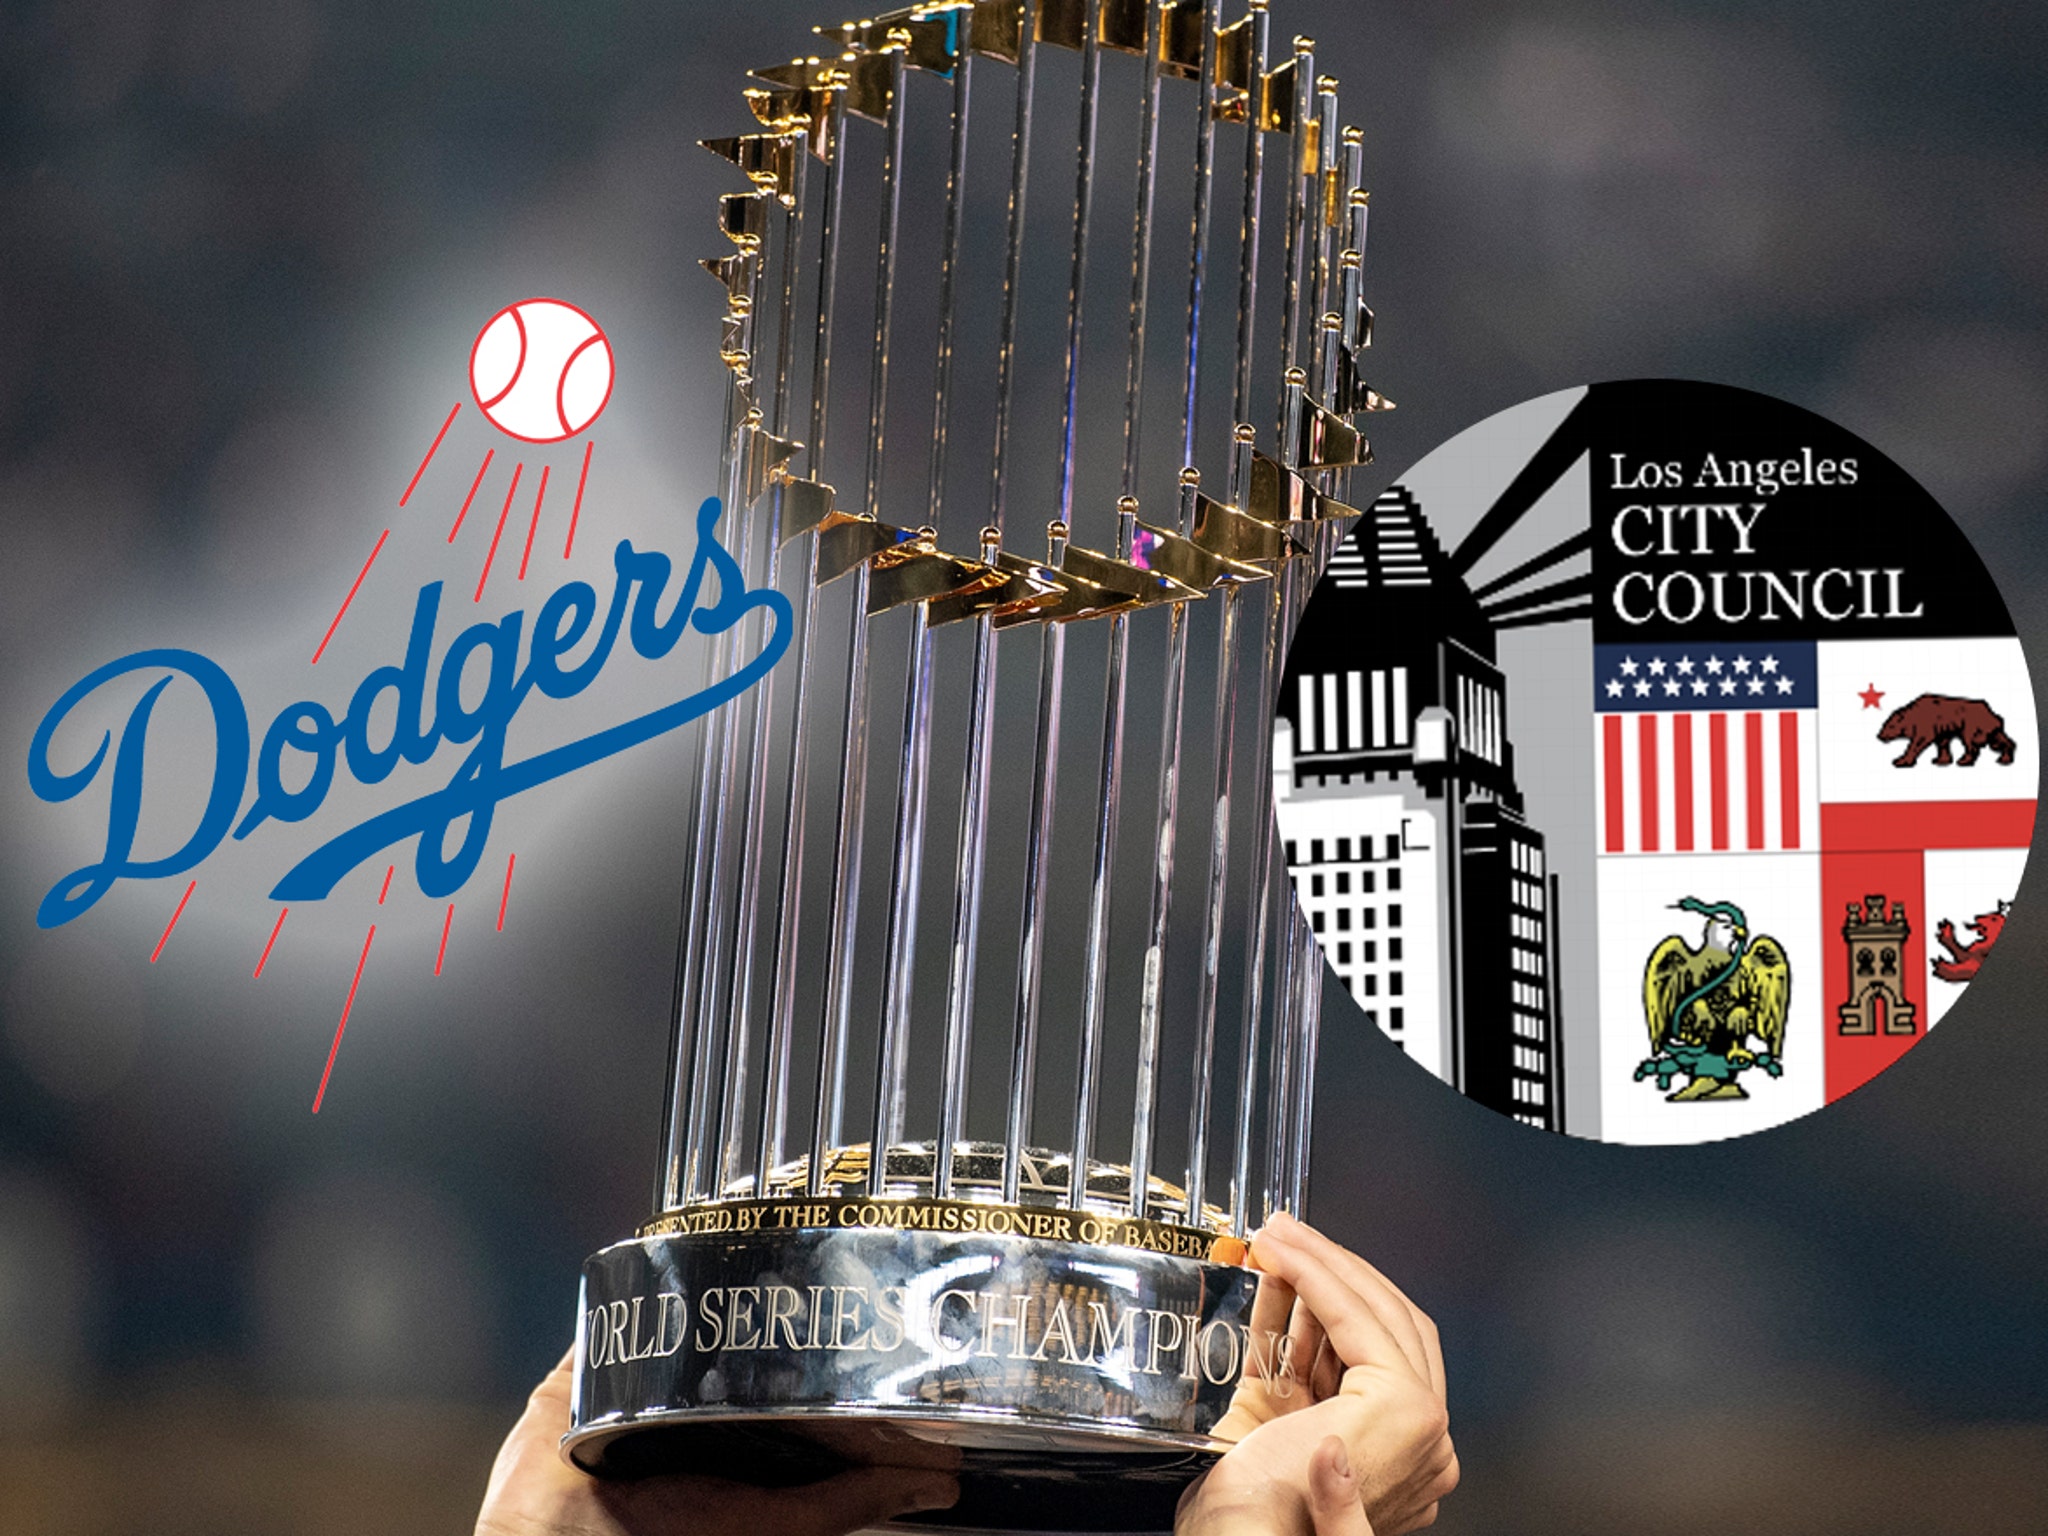 L.A. City Council asks MLB to name Dodgers world champs amid sign